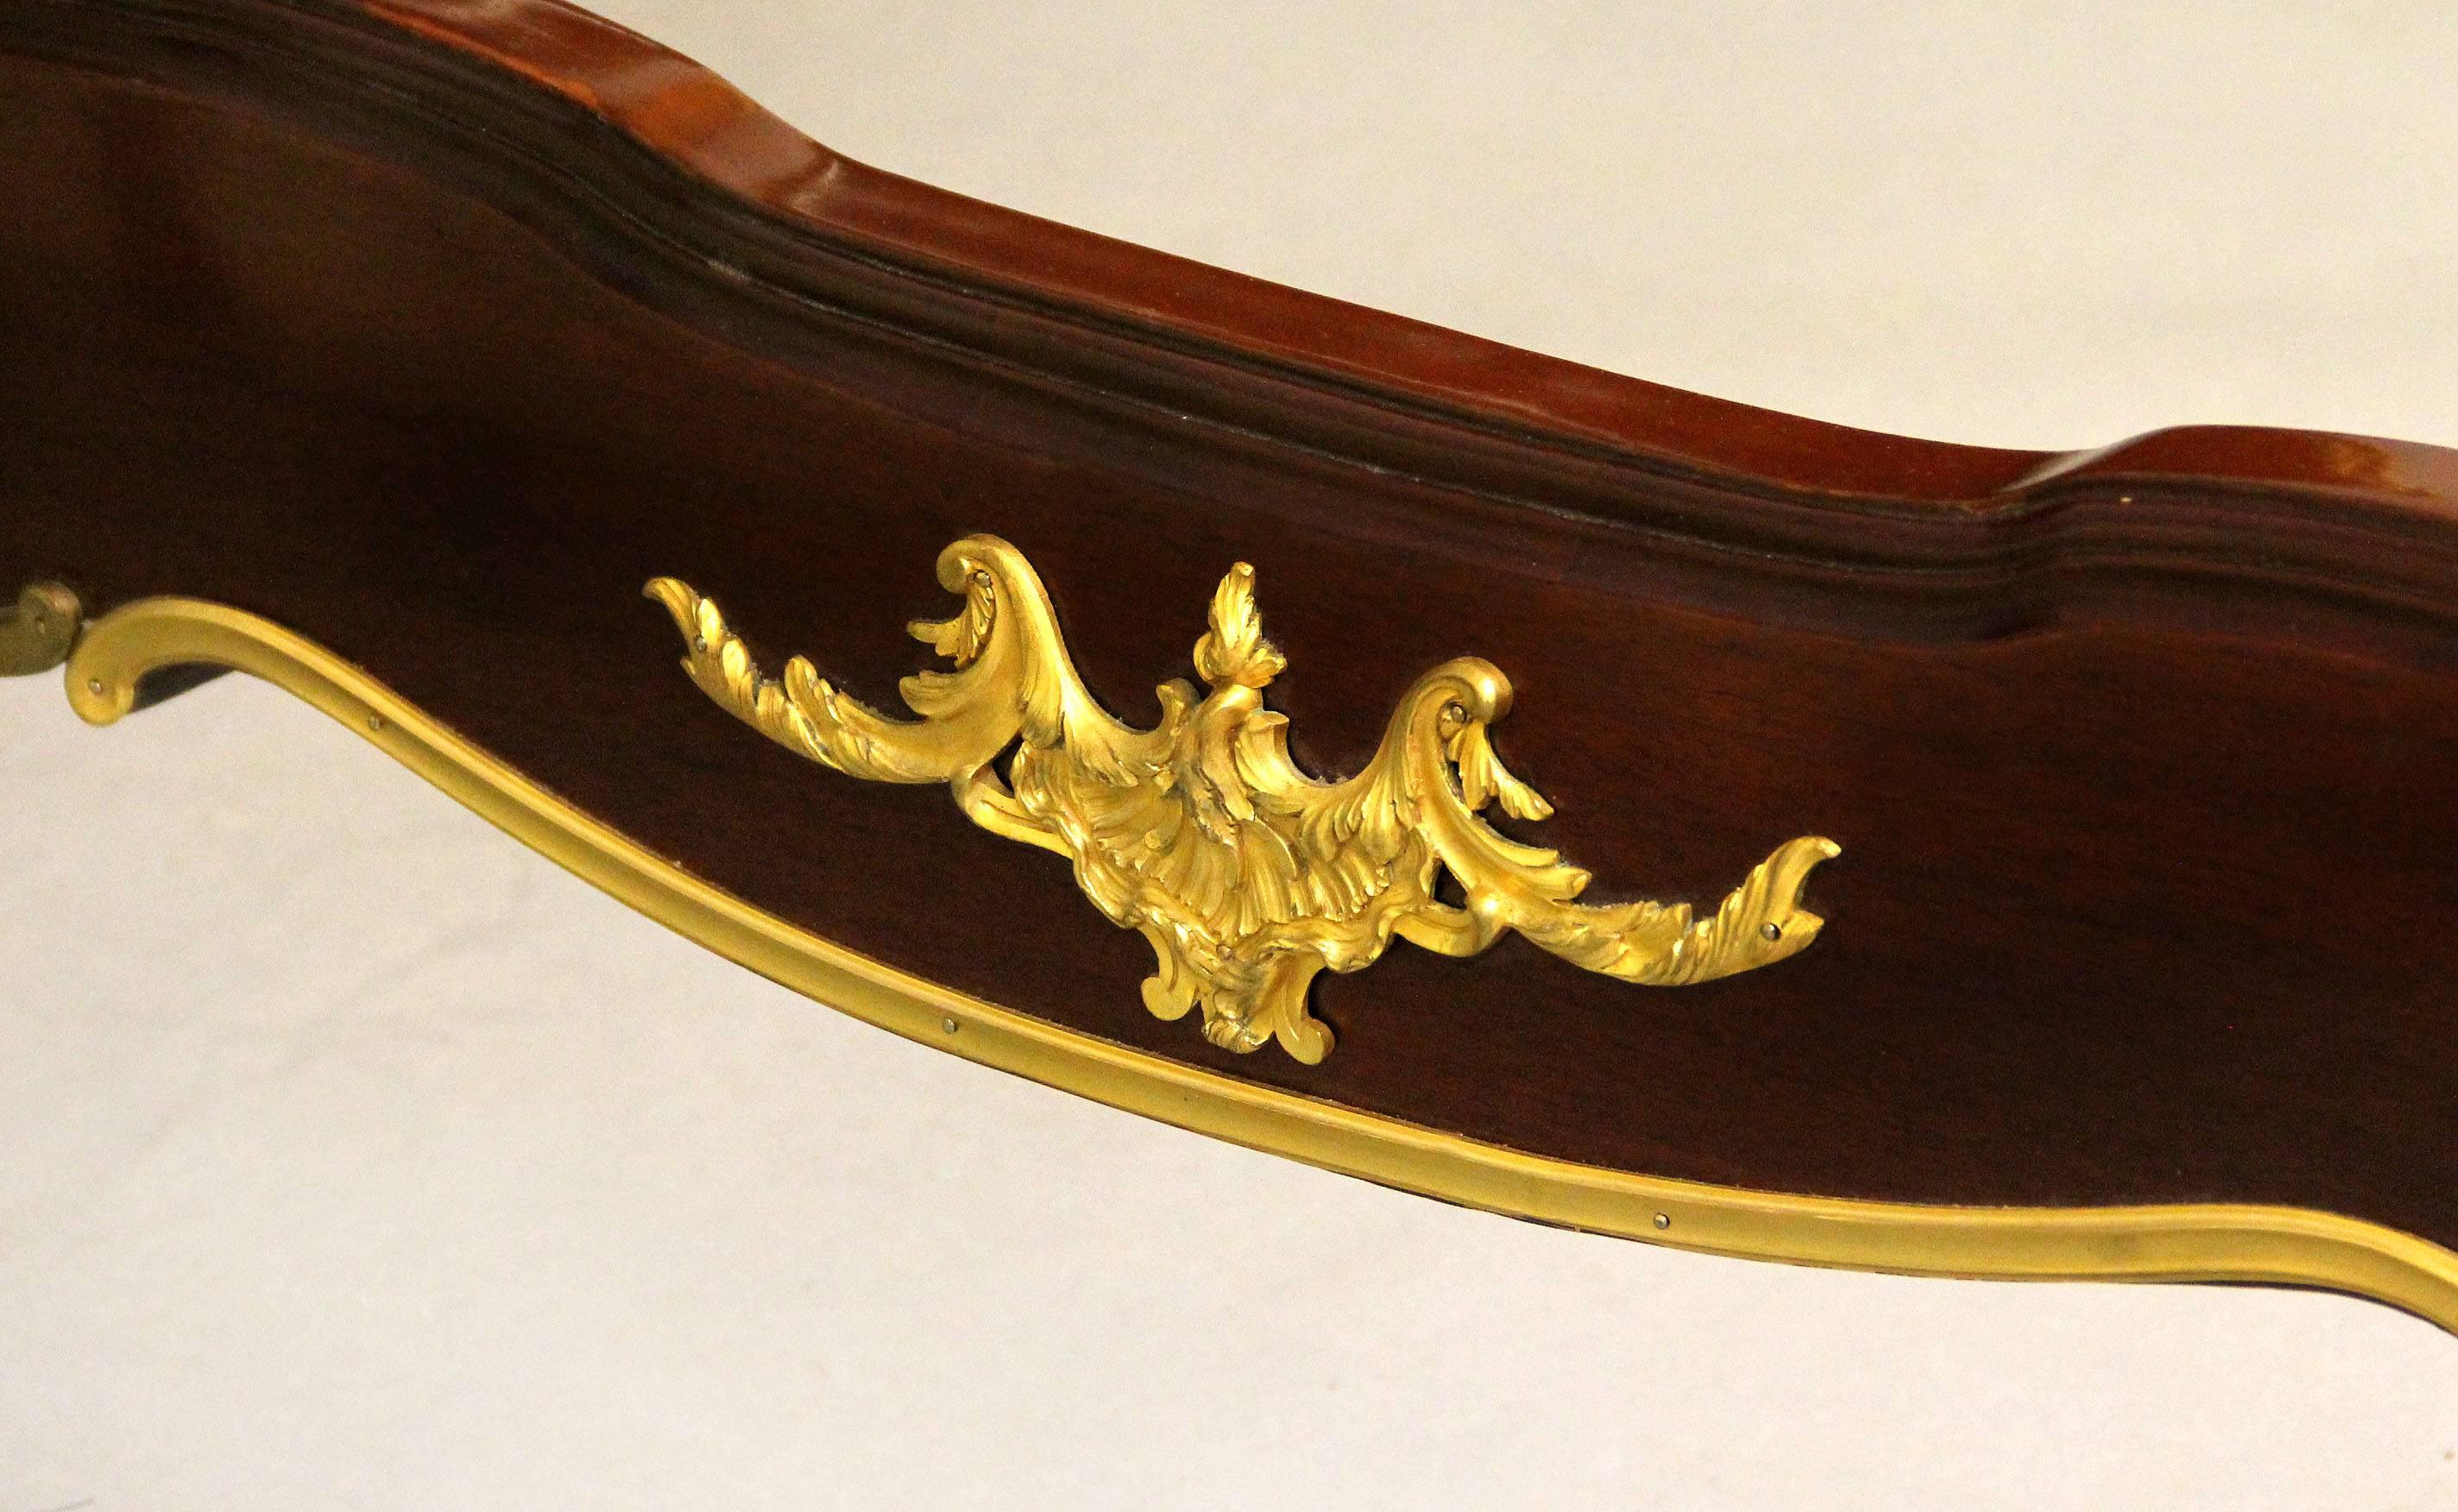 Wood Early 20th Century Gilt Bronze-Mounted Mahogany King Size Bed by François Linke